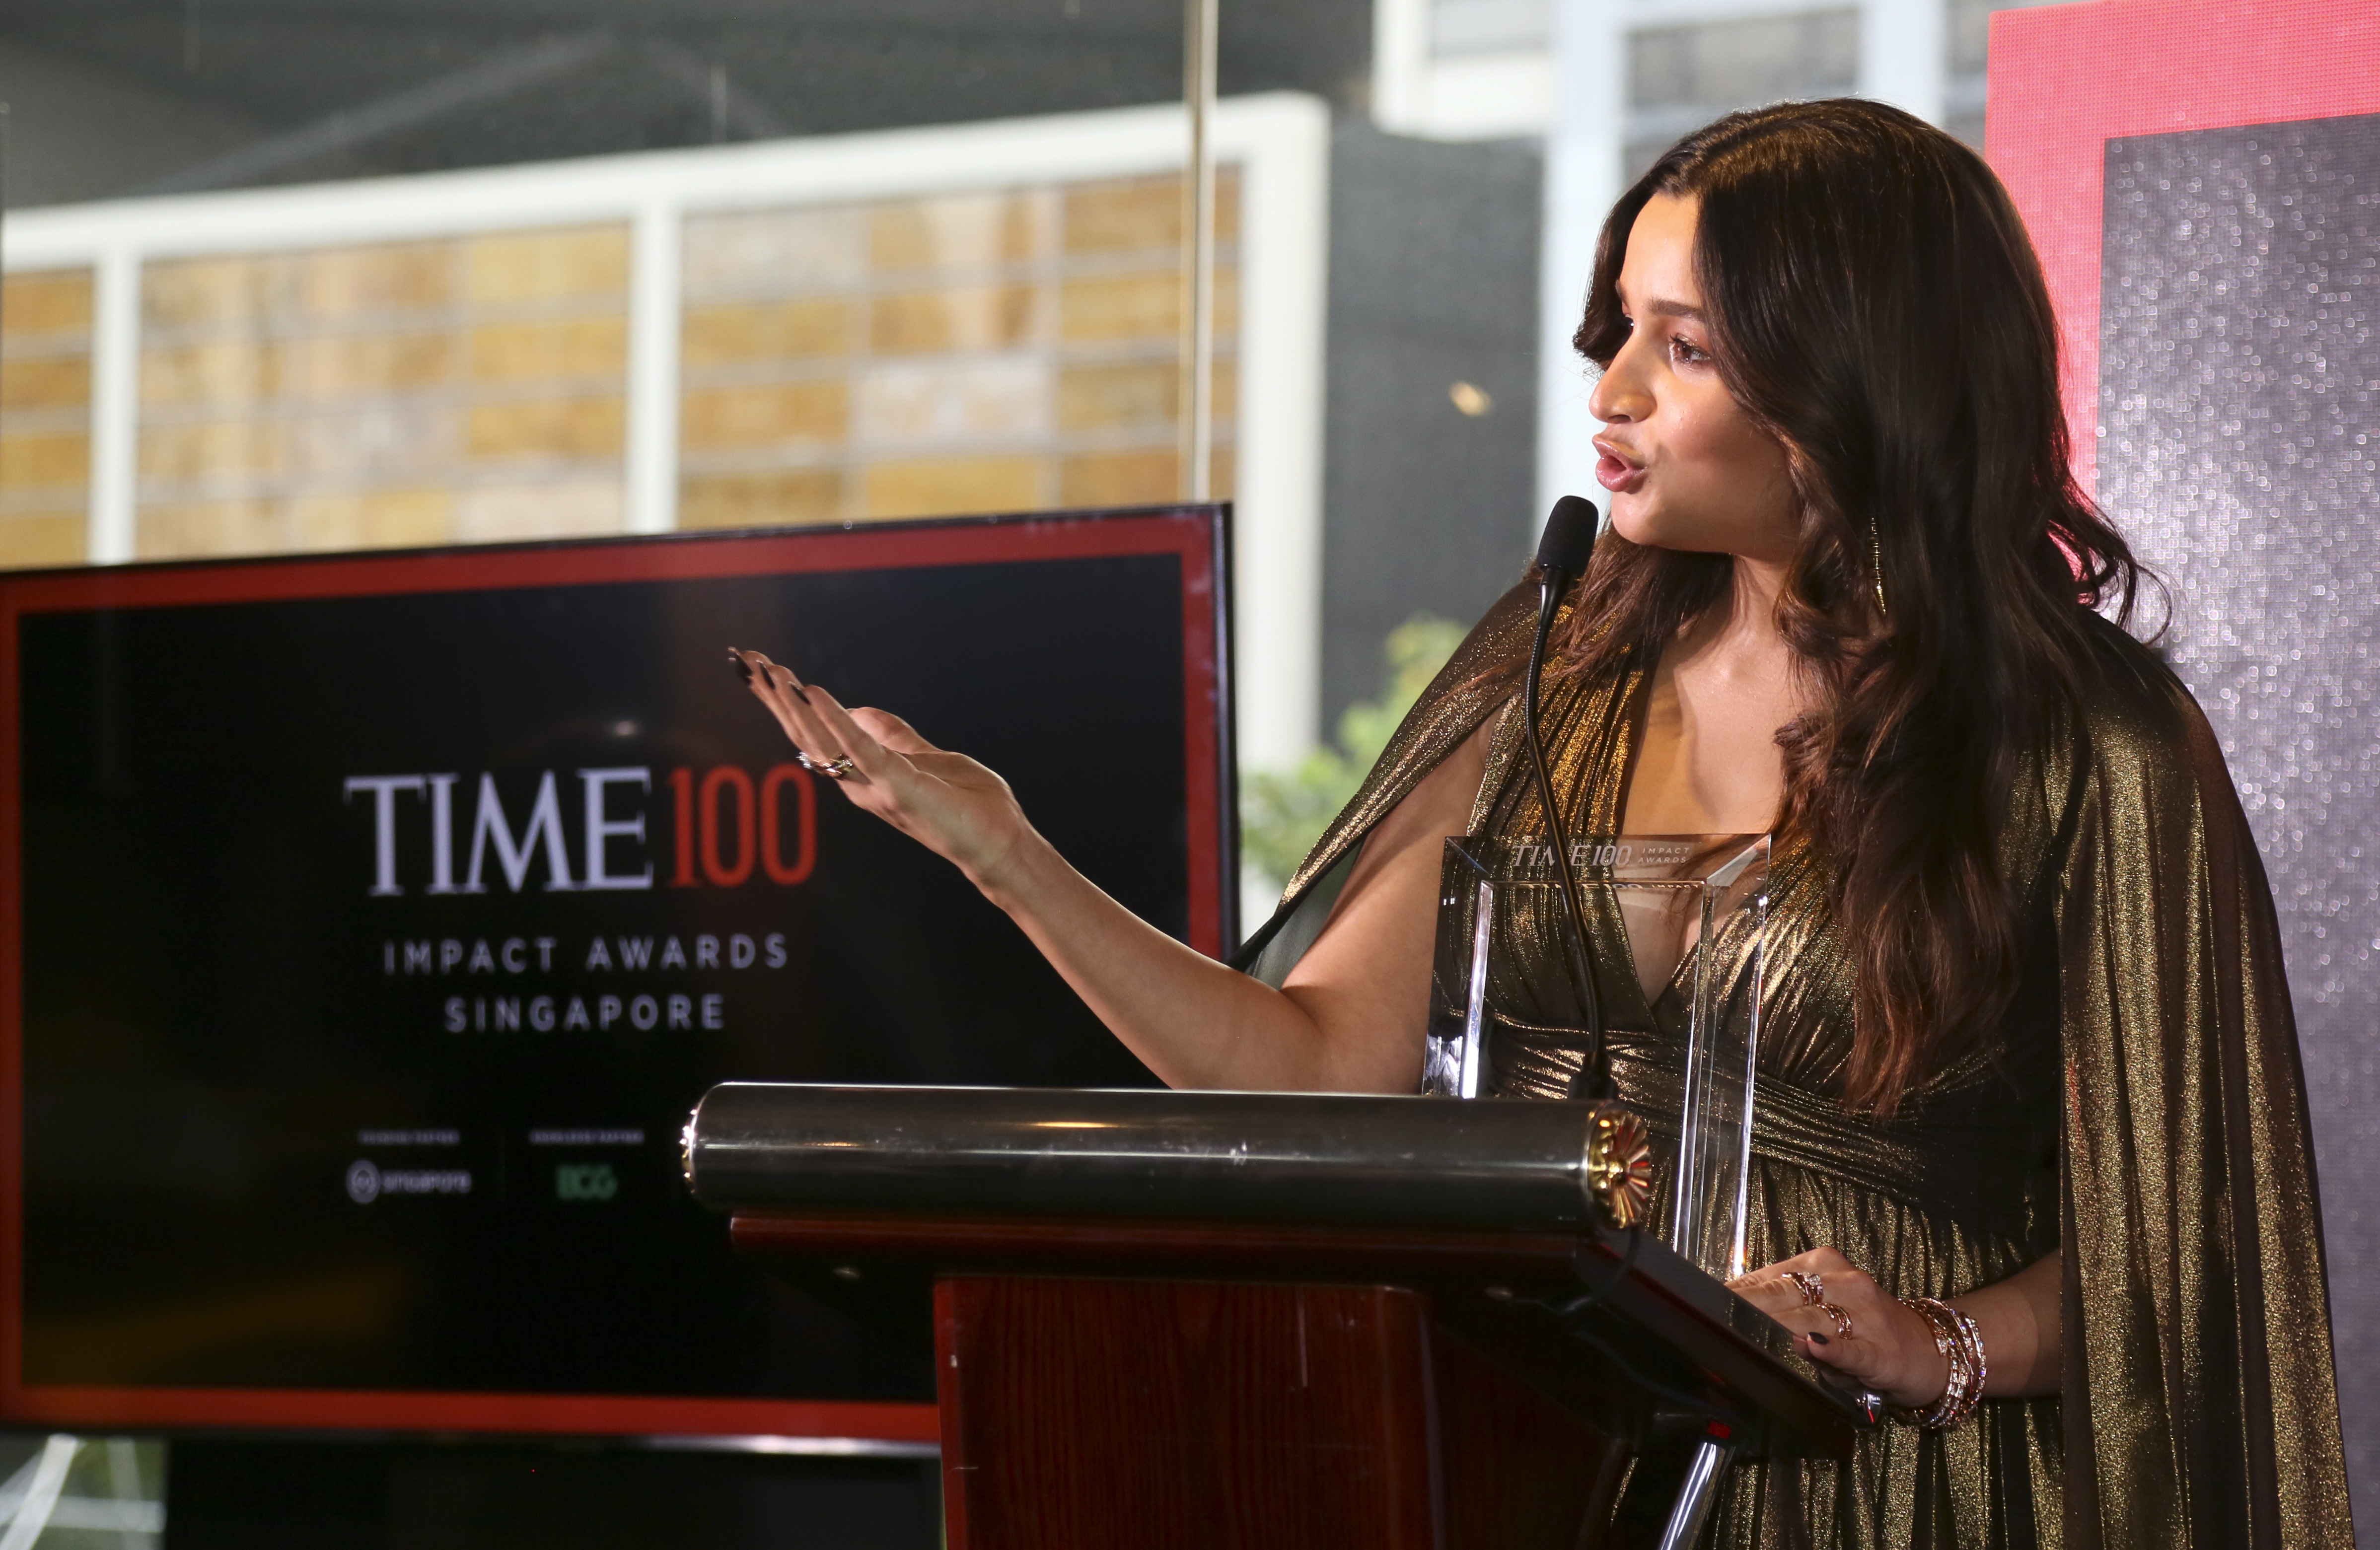 Actor and producer Alia Bhatt speaks after receiving a TIME100 Impact Award on Oct. 02, 2022 in Singapore. (Ore Huiying—Getty Images for TIME)